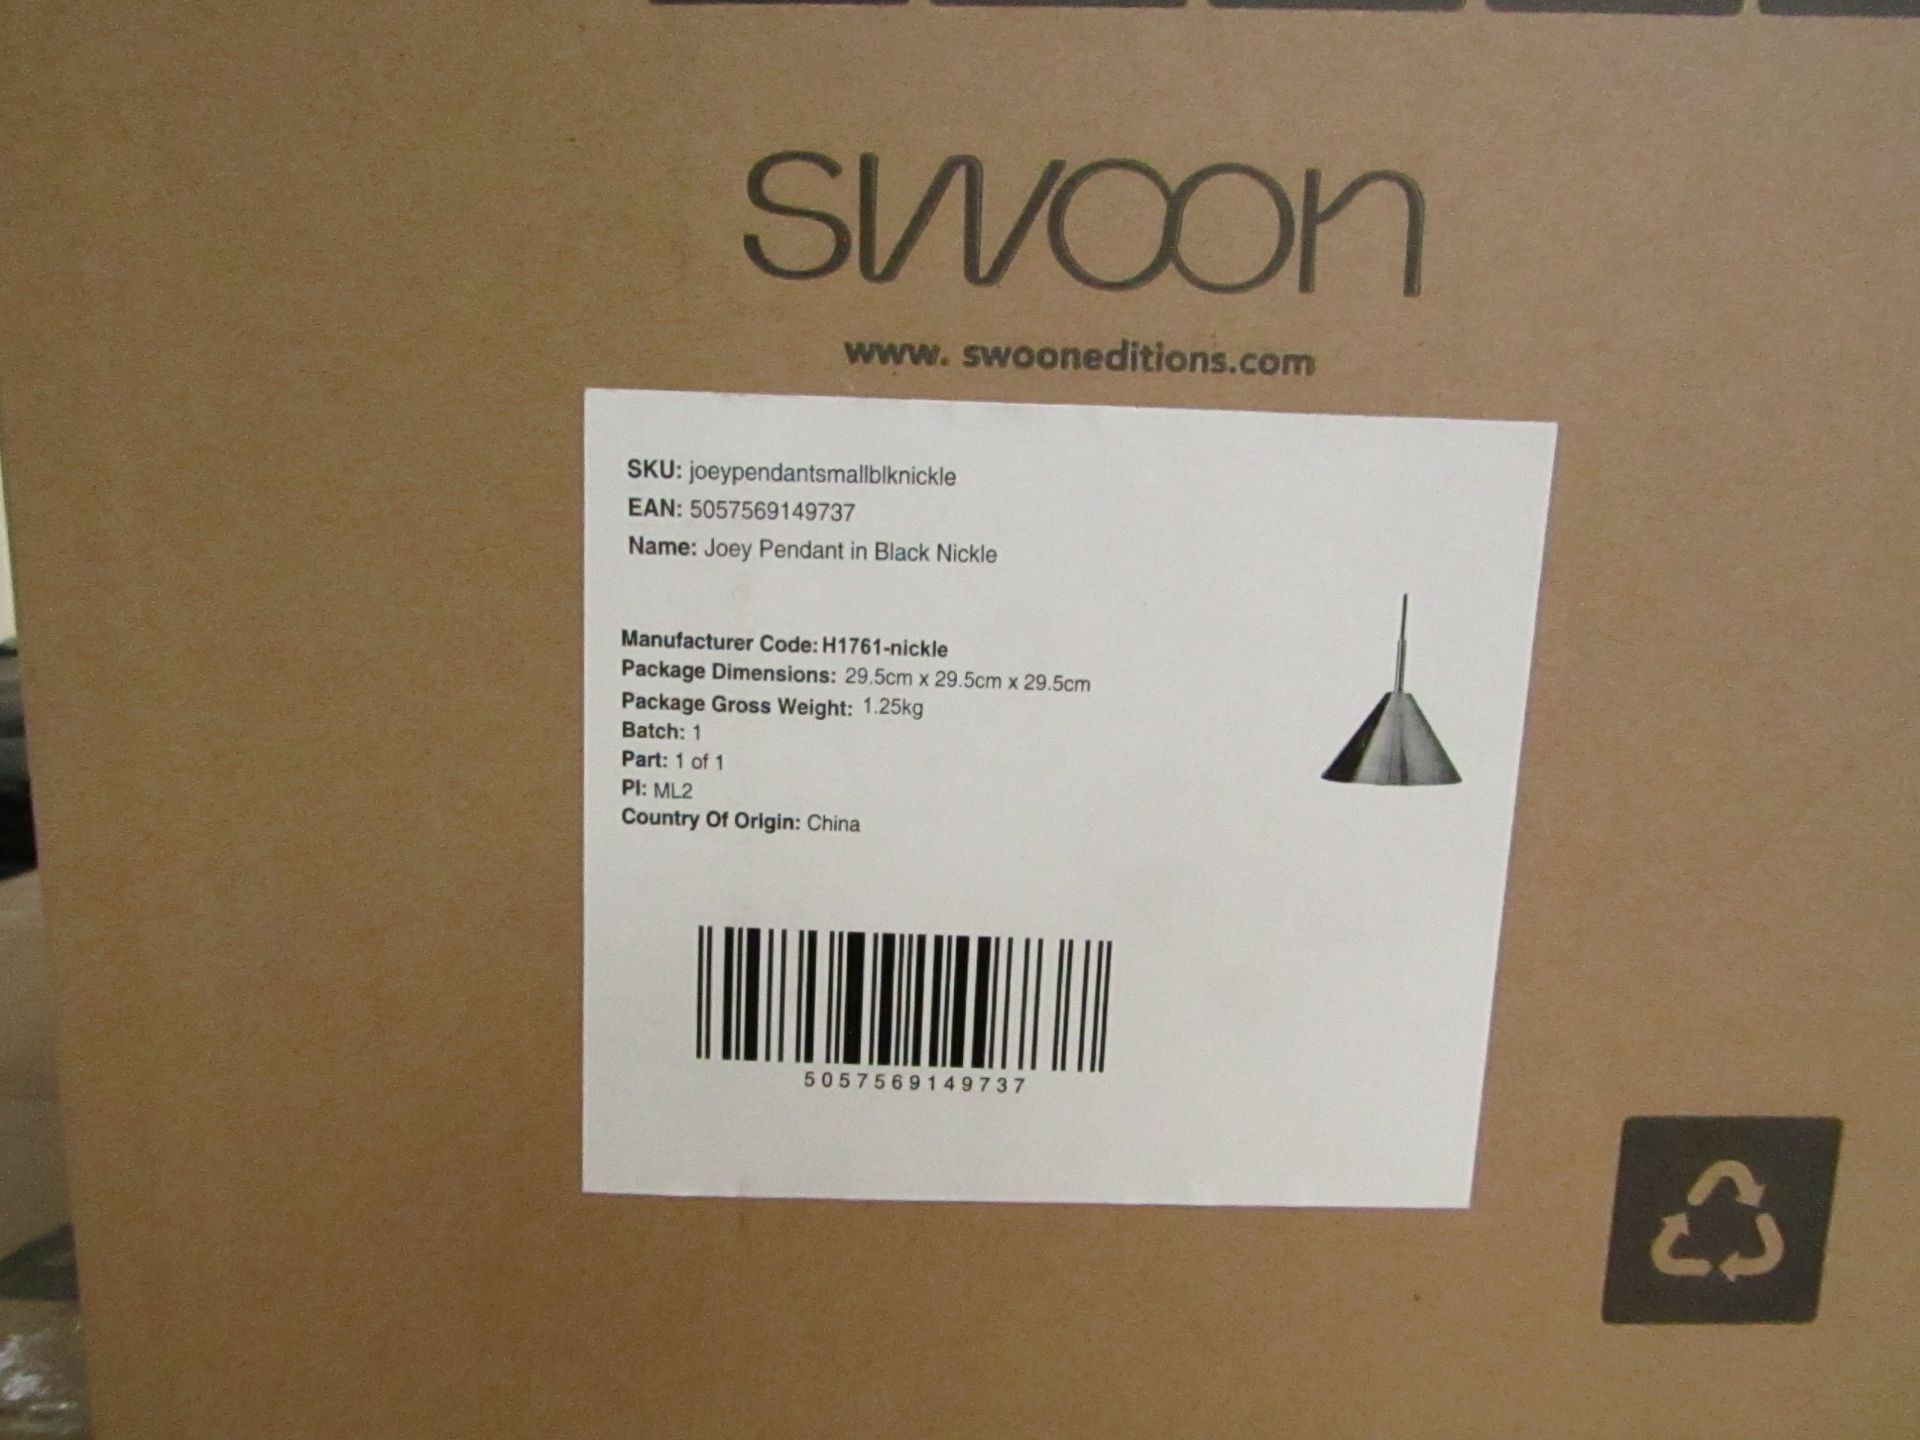 |1x SWOON JOEY PENDANT LIGHT IN BLACK NICKLE | NEW AND BOXED | RRP £79 |SKU 5057569149737 | - Image 2 of 2